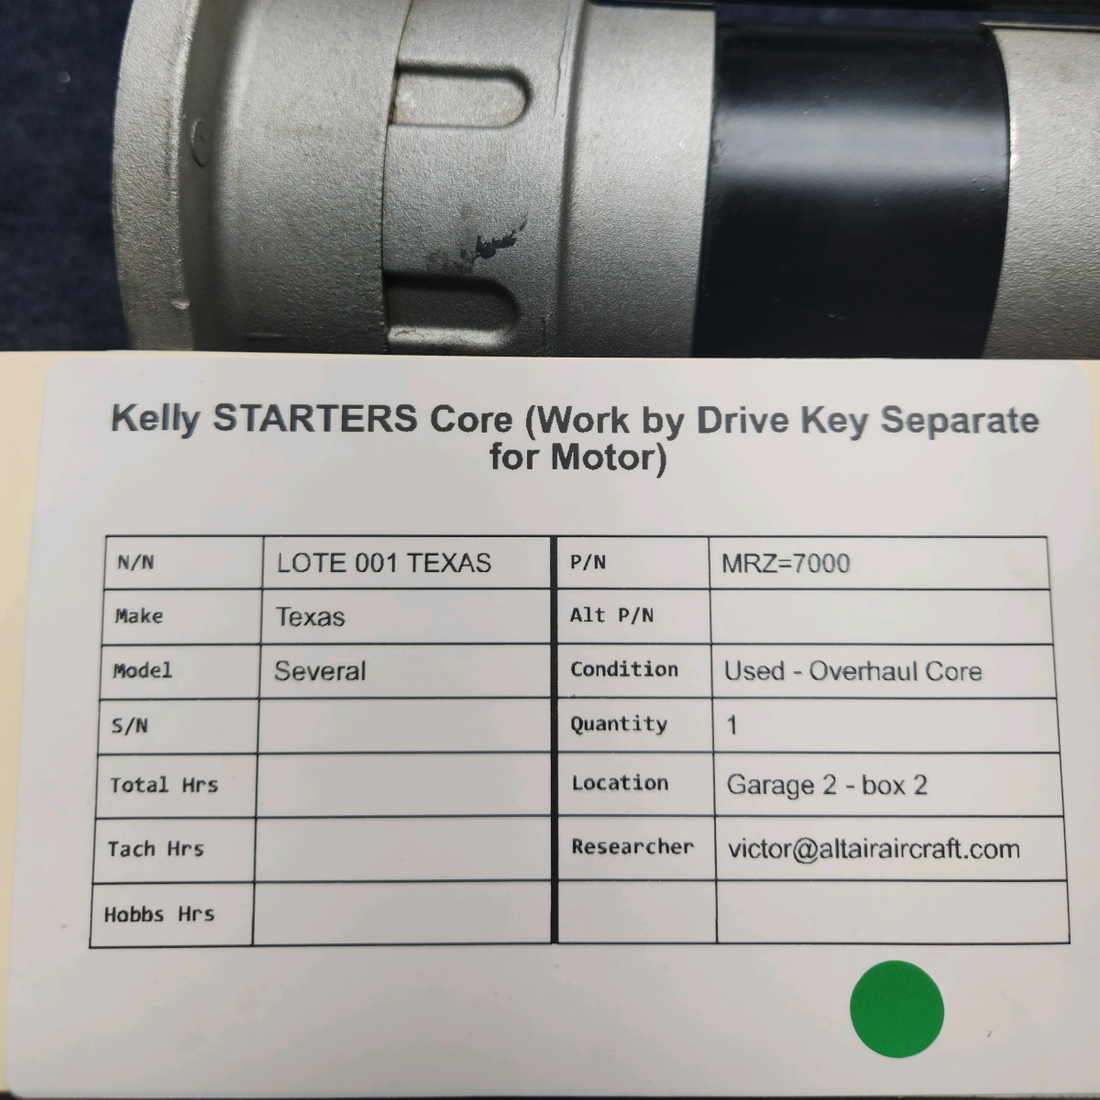 Used aircraft parts for sale, MRZ-7000 Kelly Texas Several KELLY STARTERS CORE WORK BY DRIVE KEY SEPARATE FOR MOTOR)